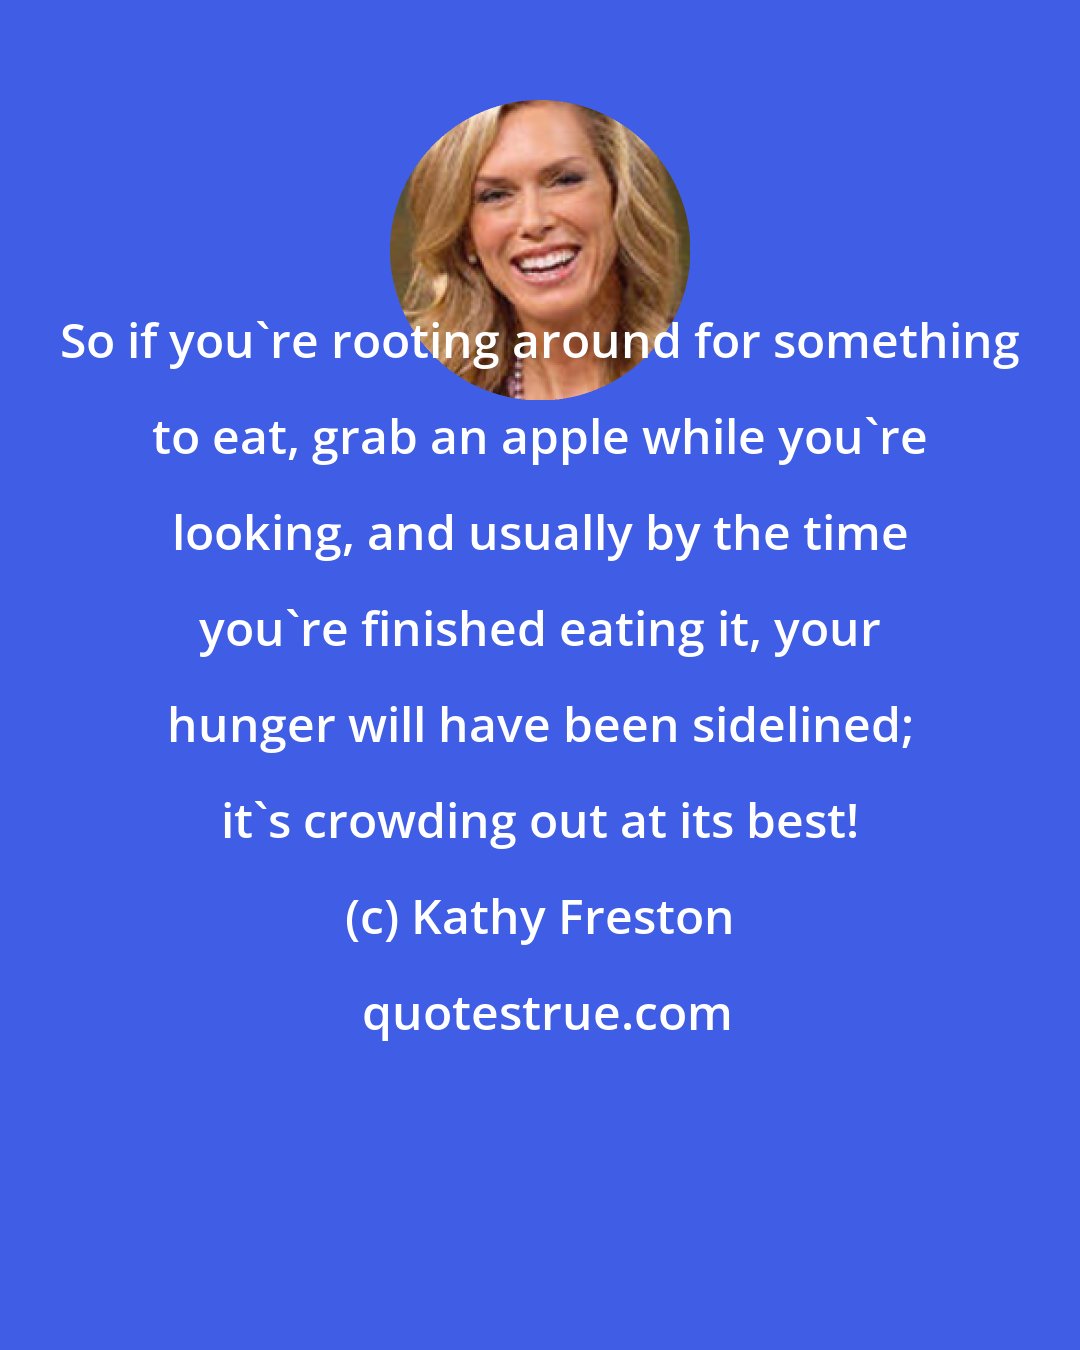 Kathy Freston: So if you're rooting around for something to eat, grab an apple while you're looking, and usually by the time you're finished eating it, your hunger will have been sidelined; it's crowding out at its best!